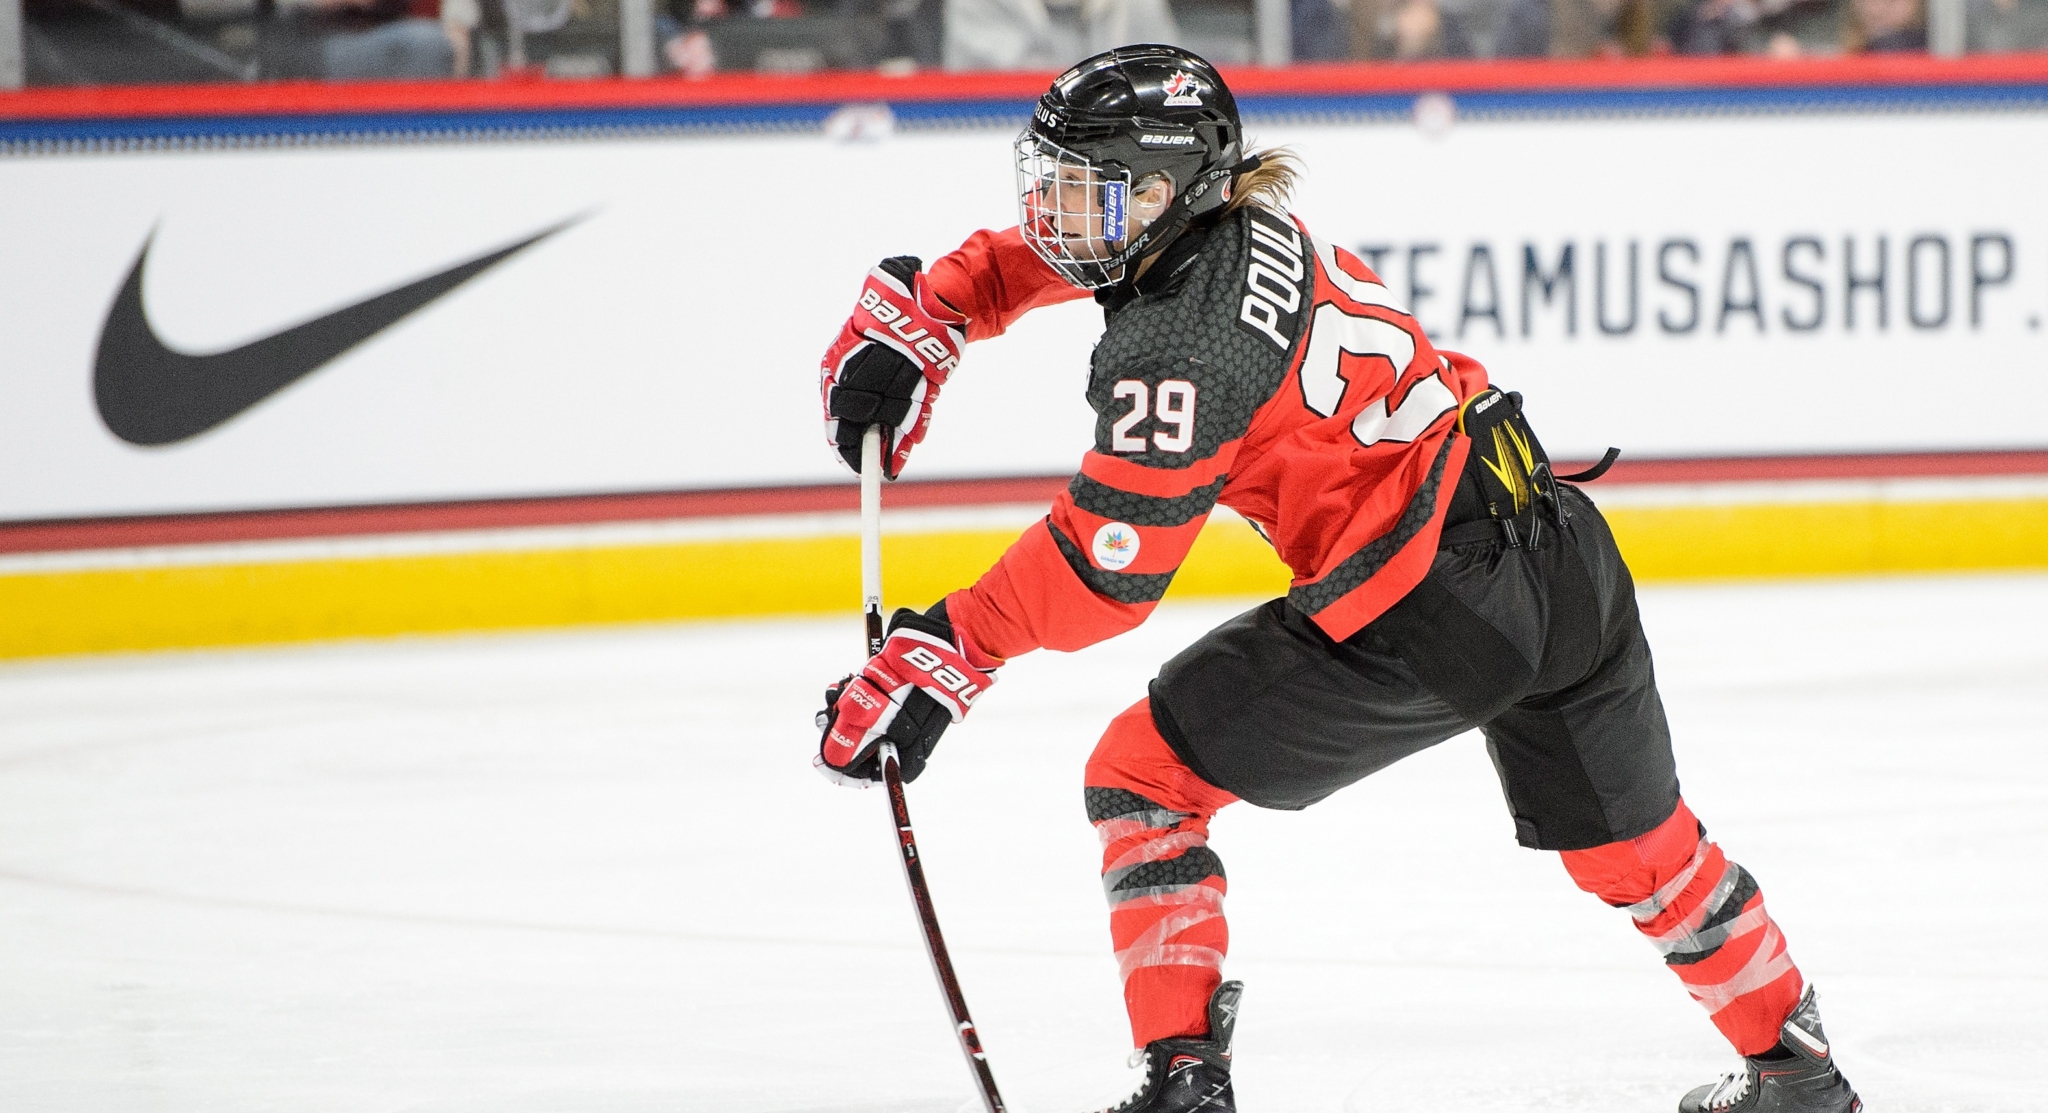 2019 IIHF WOMENS WORLD CHAMPIONSHIP Lives on TSN, with Comprehensive Live Coverage Beginning April 4